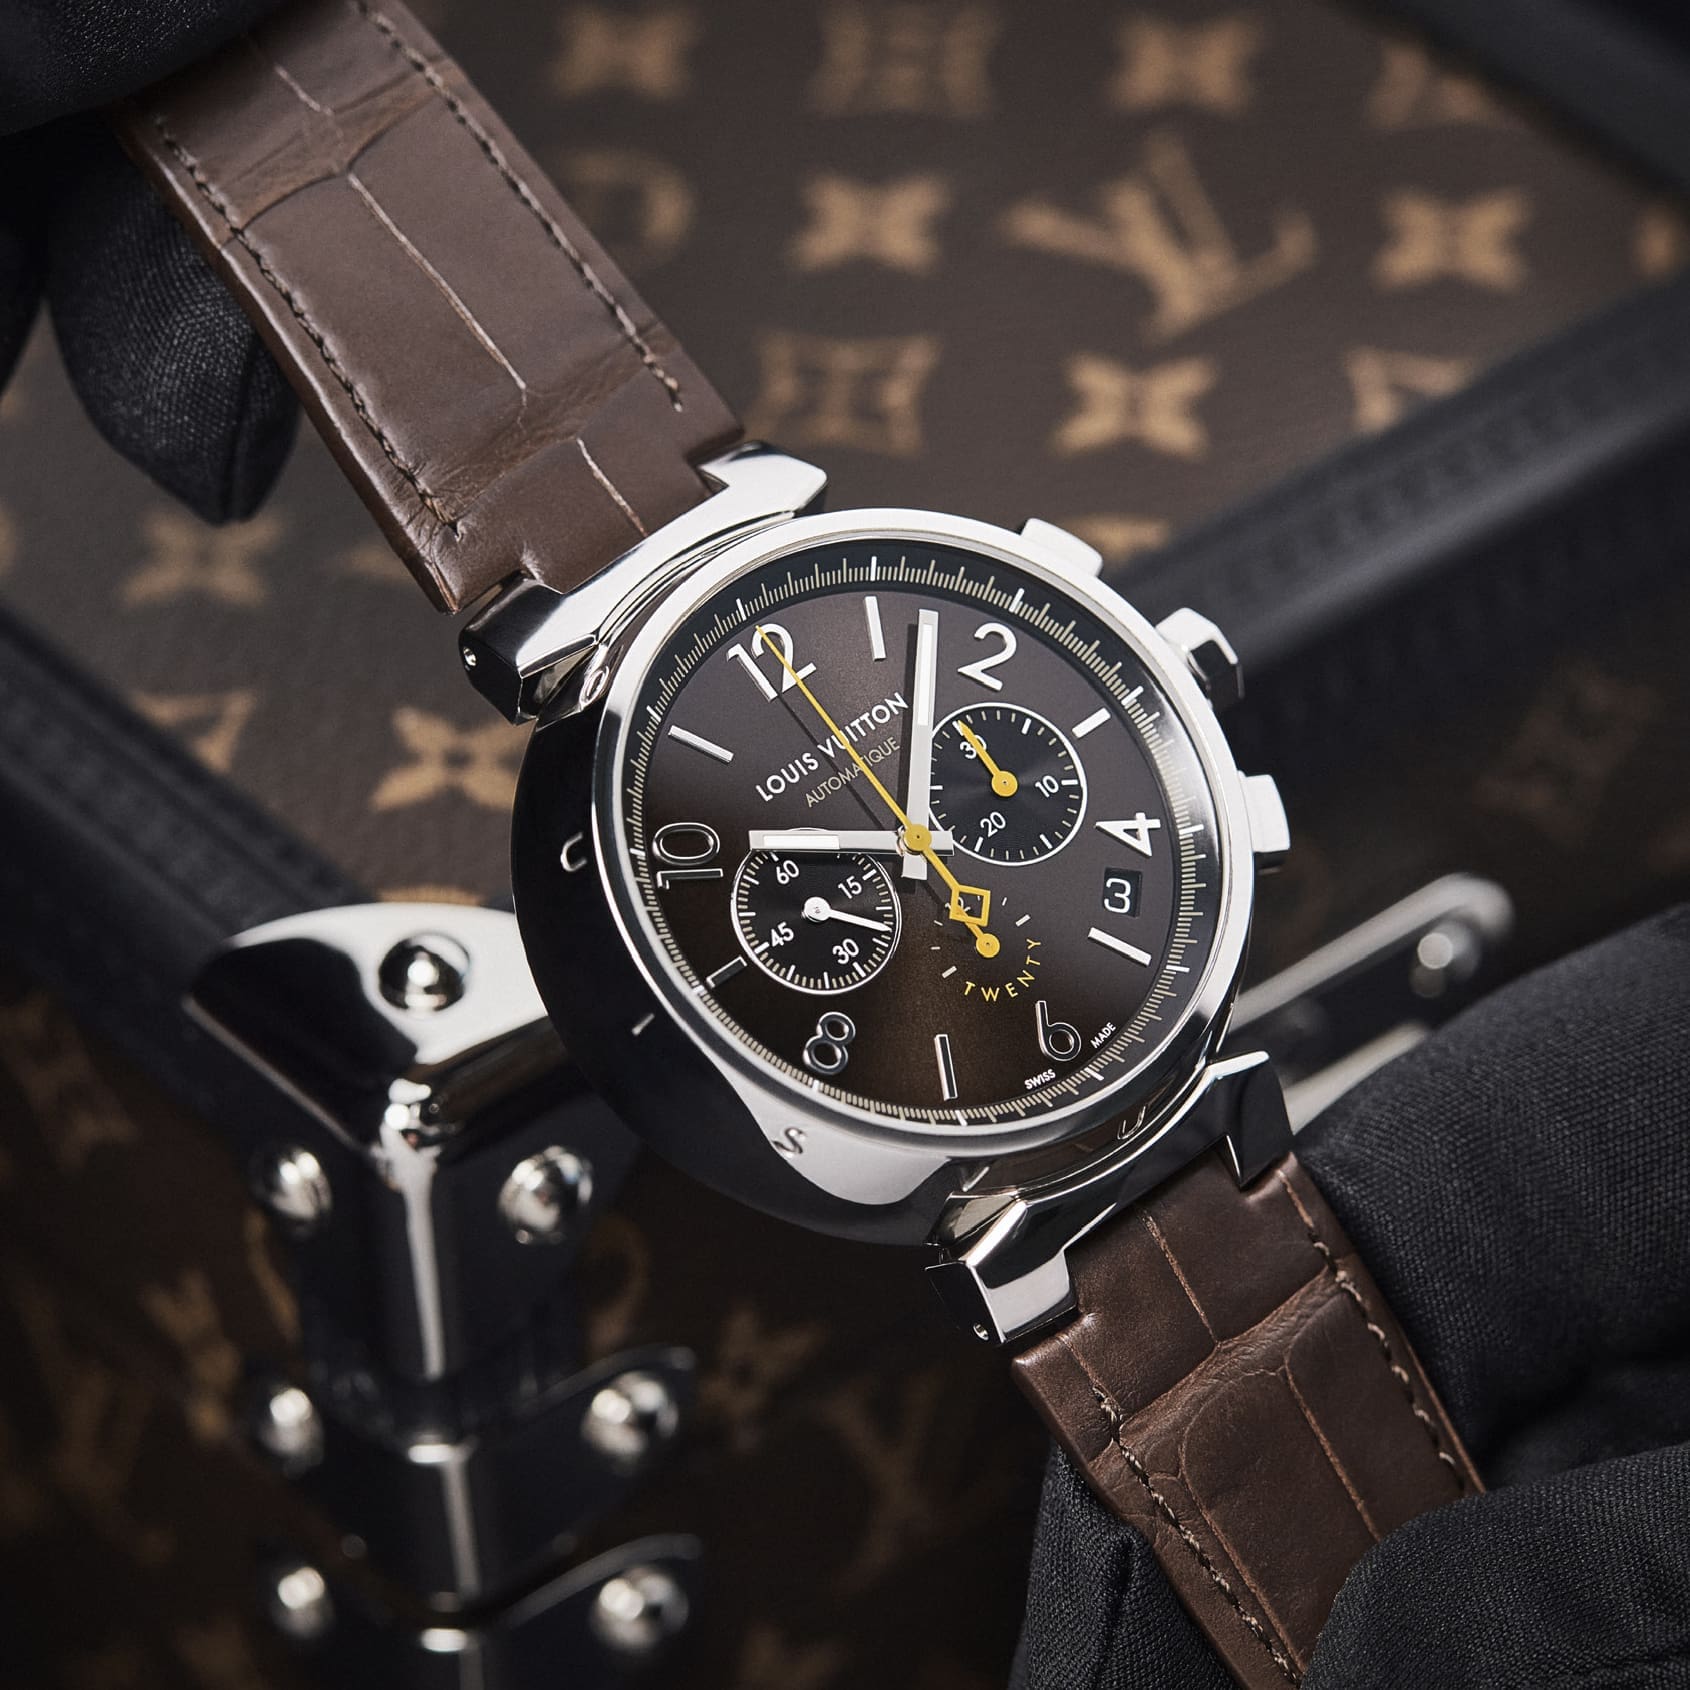 INTRODUCING: The Louis Vuitton Tambour Twenty celebrates two decades of banging the drum